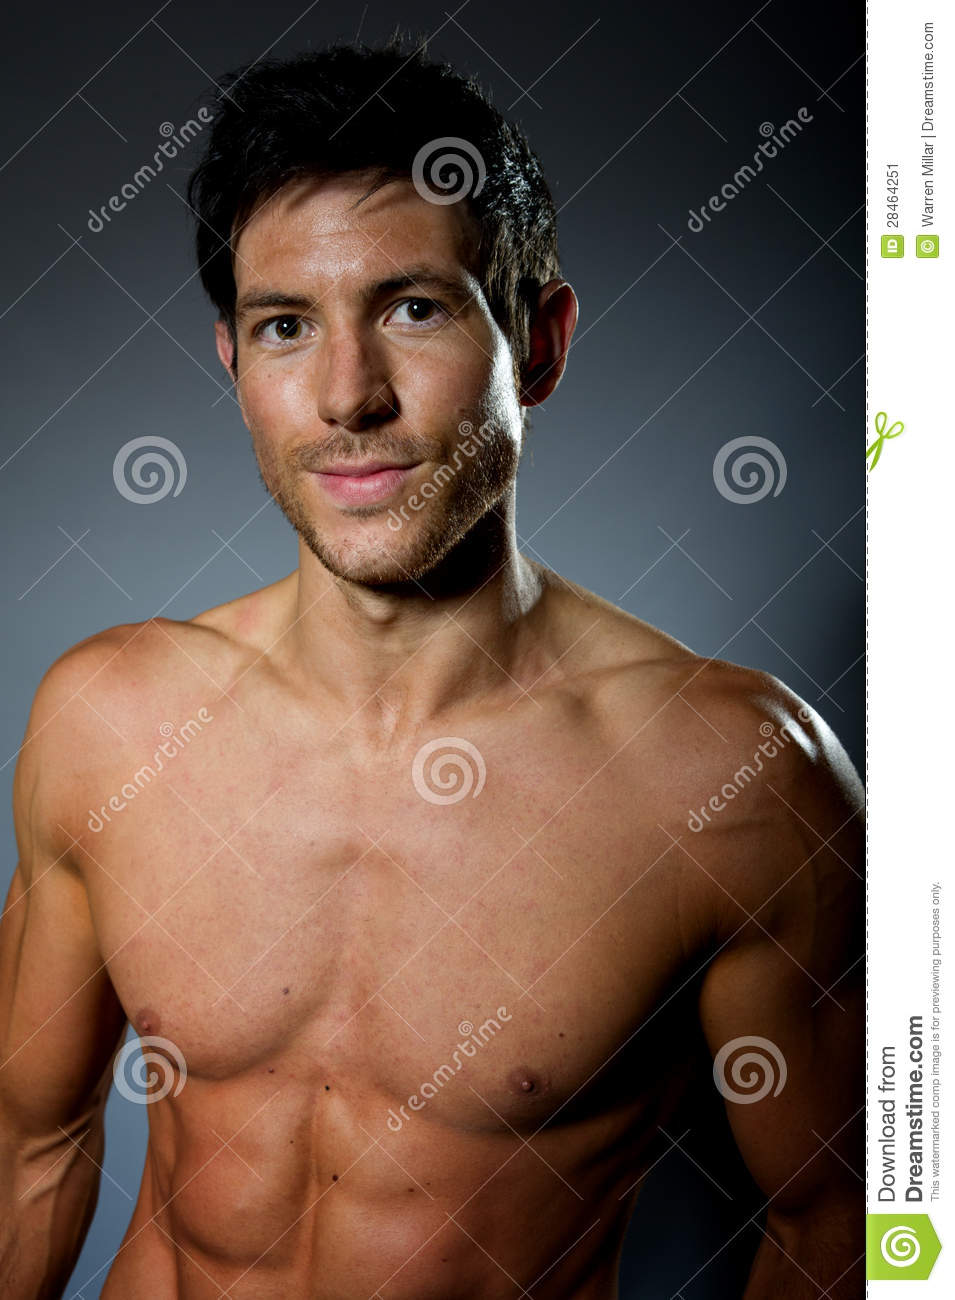 Fit Young Male With Great Healthy Body Stock Image   Image  28464251